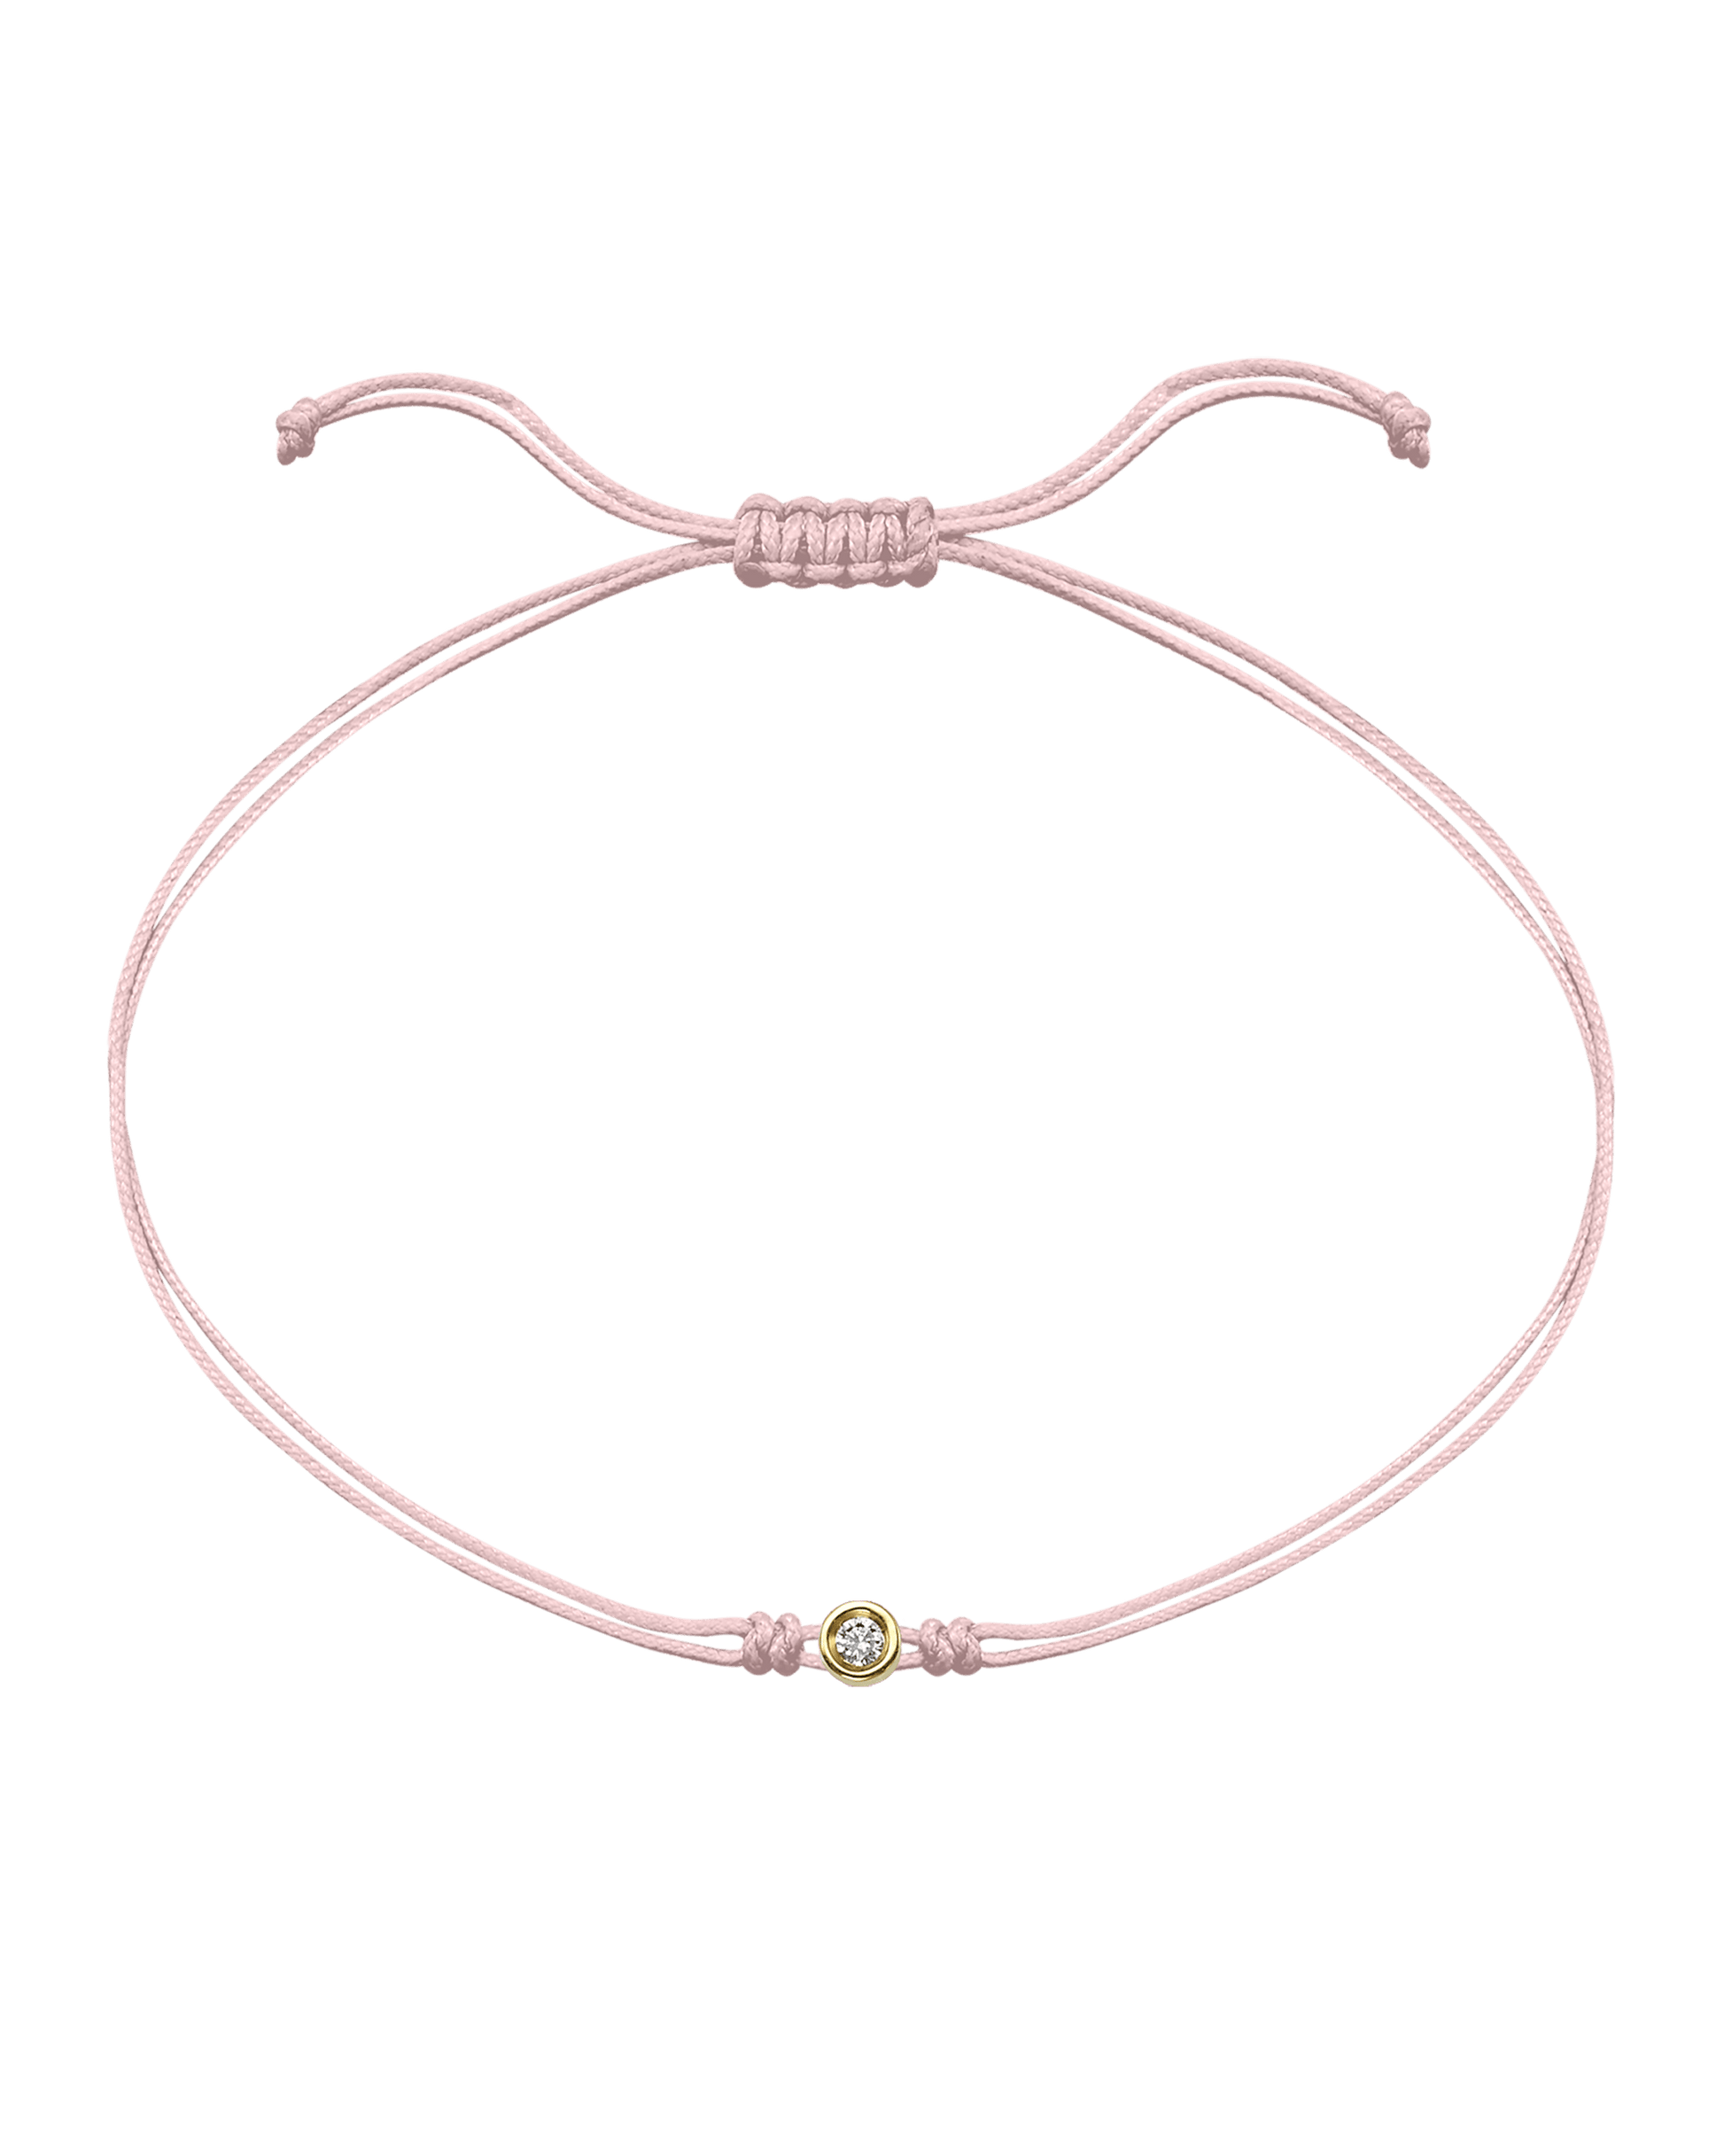 Summer Edition : The Classic String of Love - 14K Yellow Gold Bracelets magal-dev Strawberry Bellini - Light Pink Small: 0.03ct 